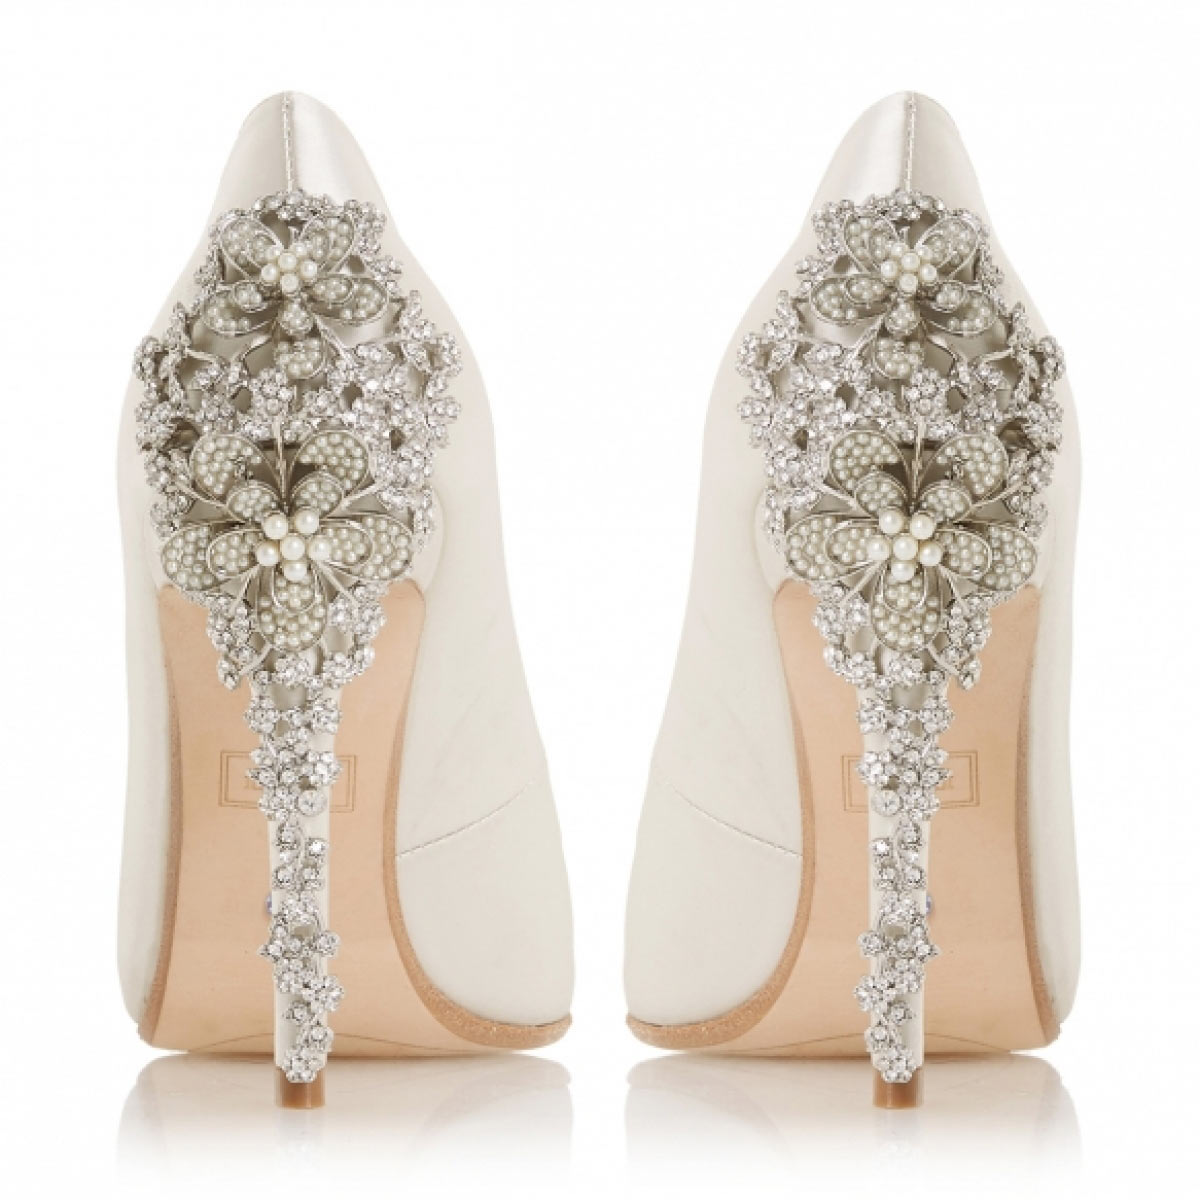 Bridal Shoes - Stepping Out